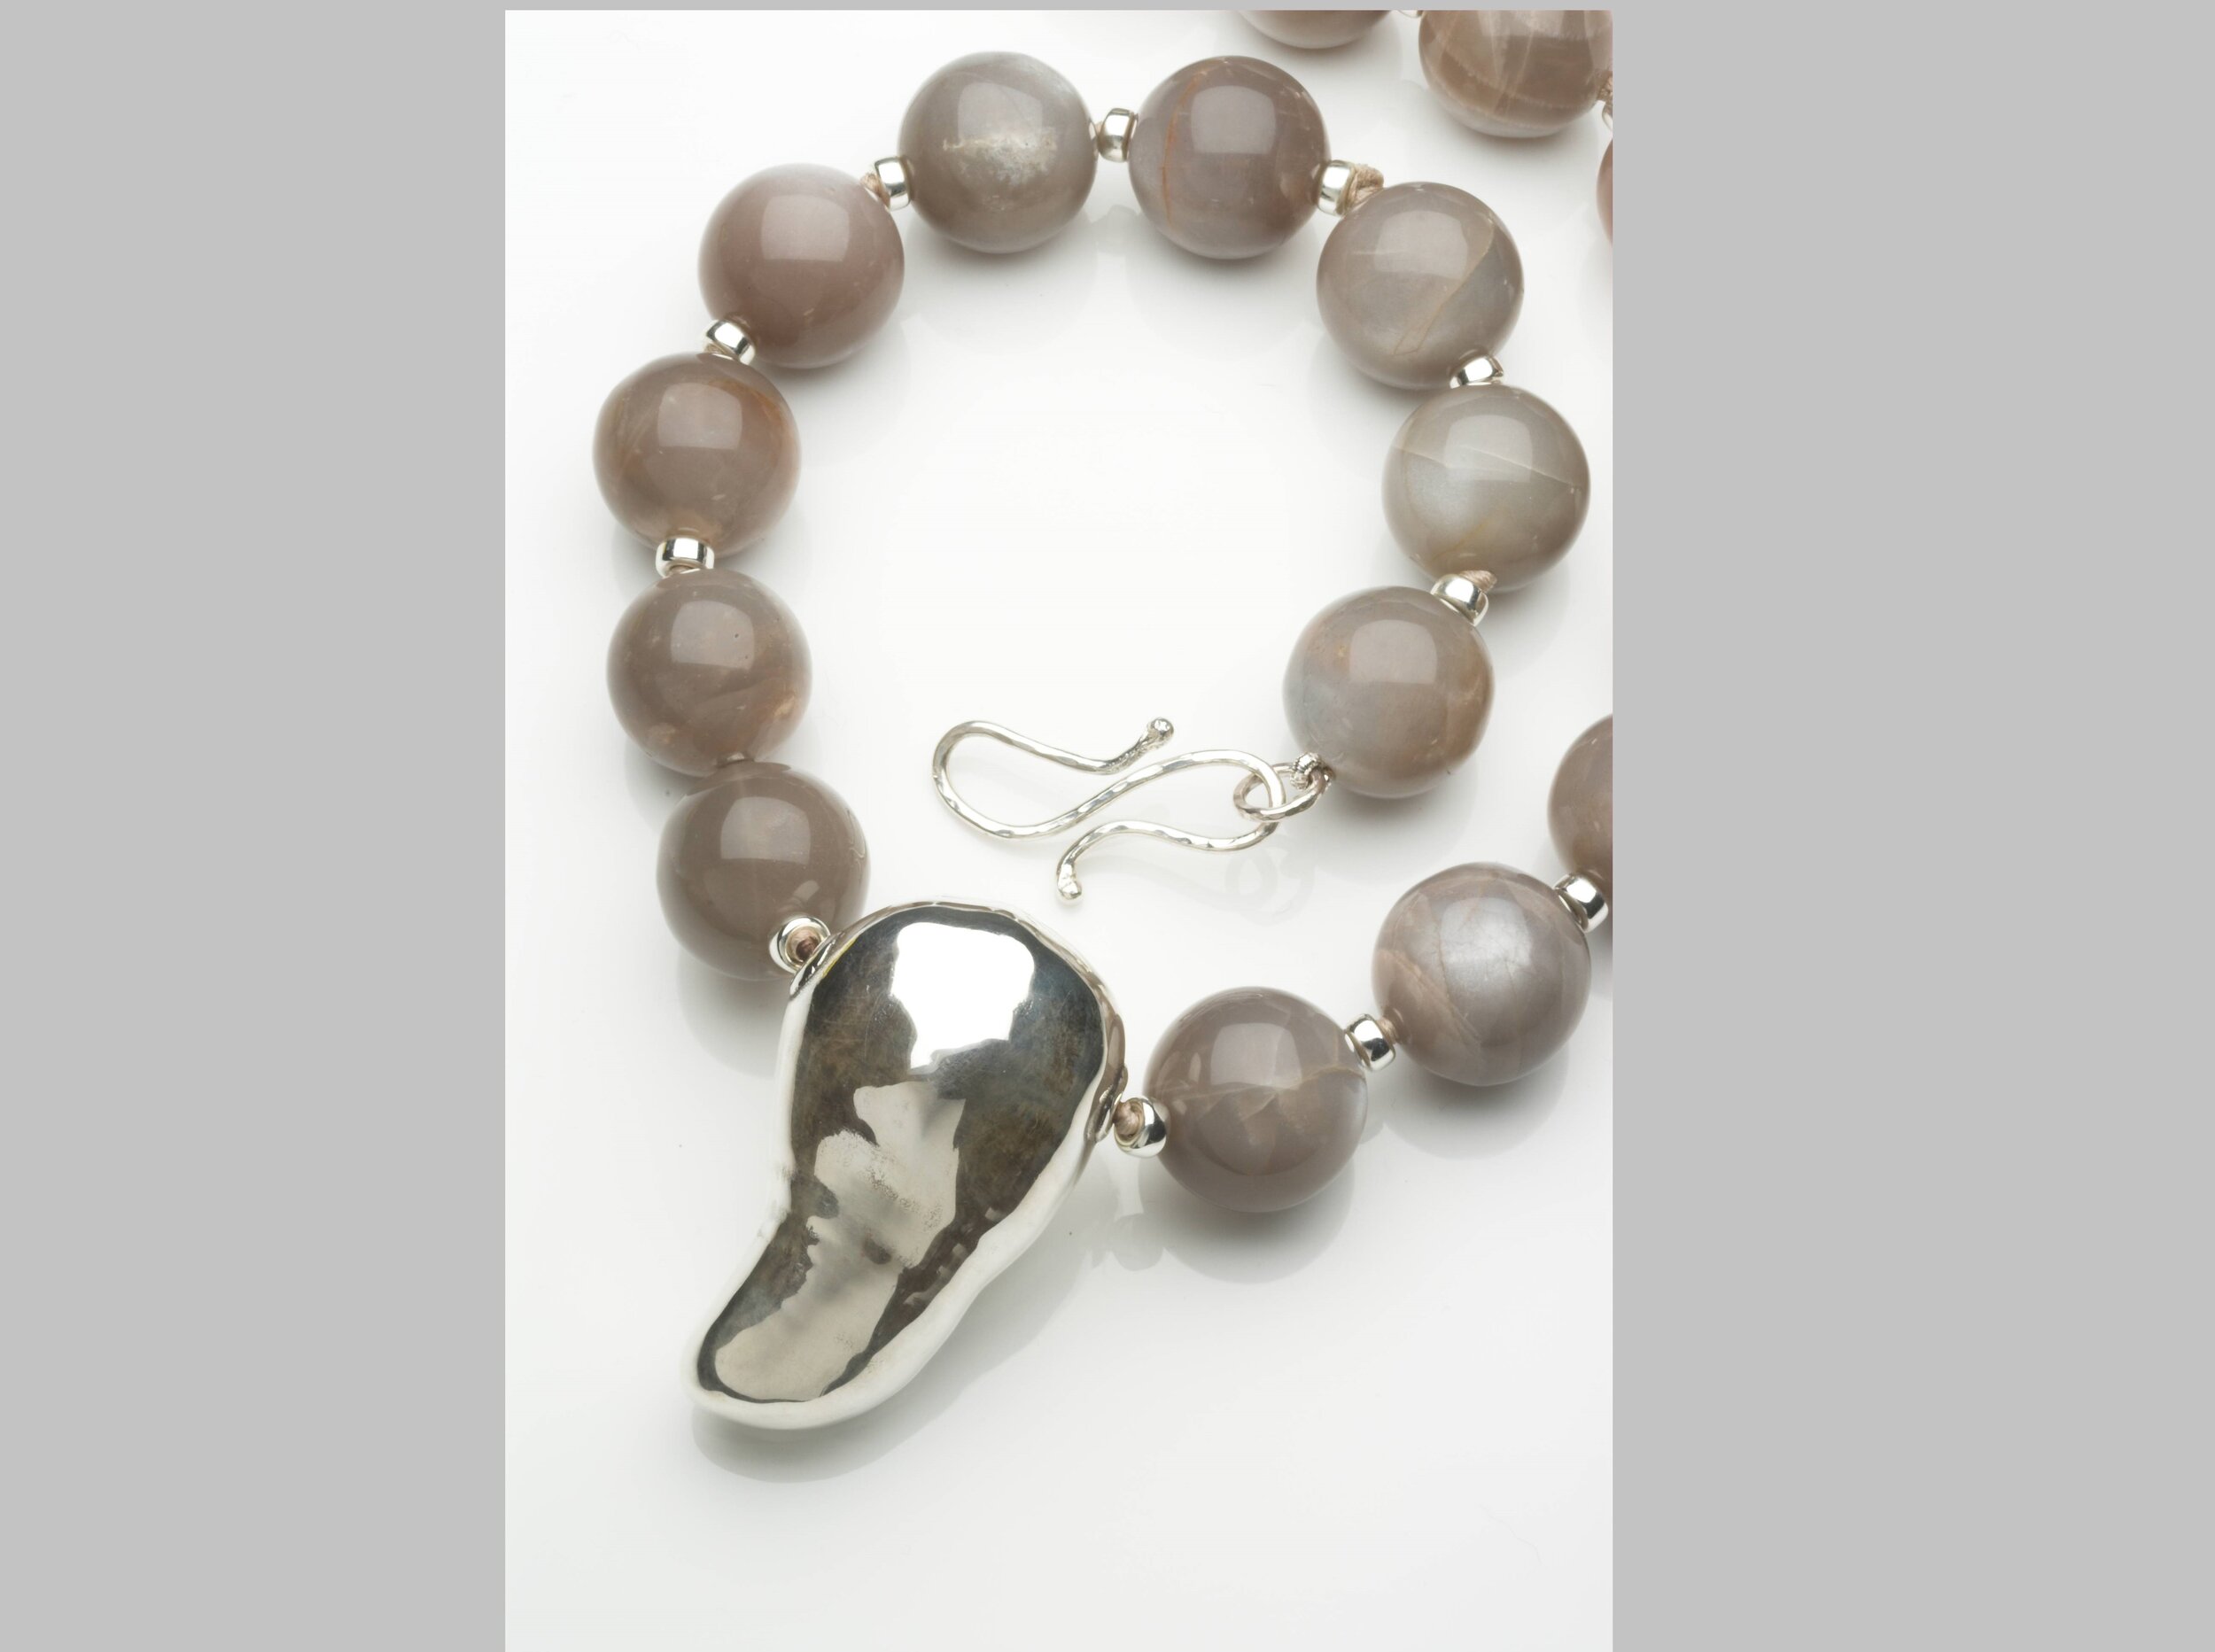 2.Moonstone and silver necklace.jpg